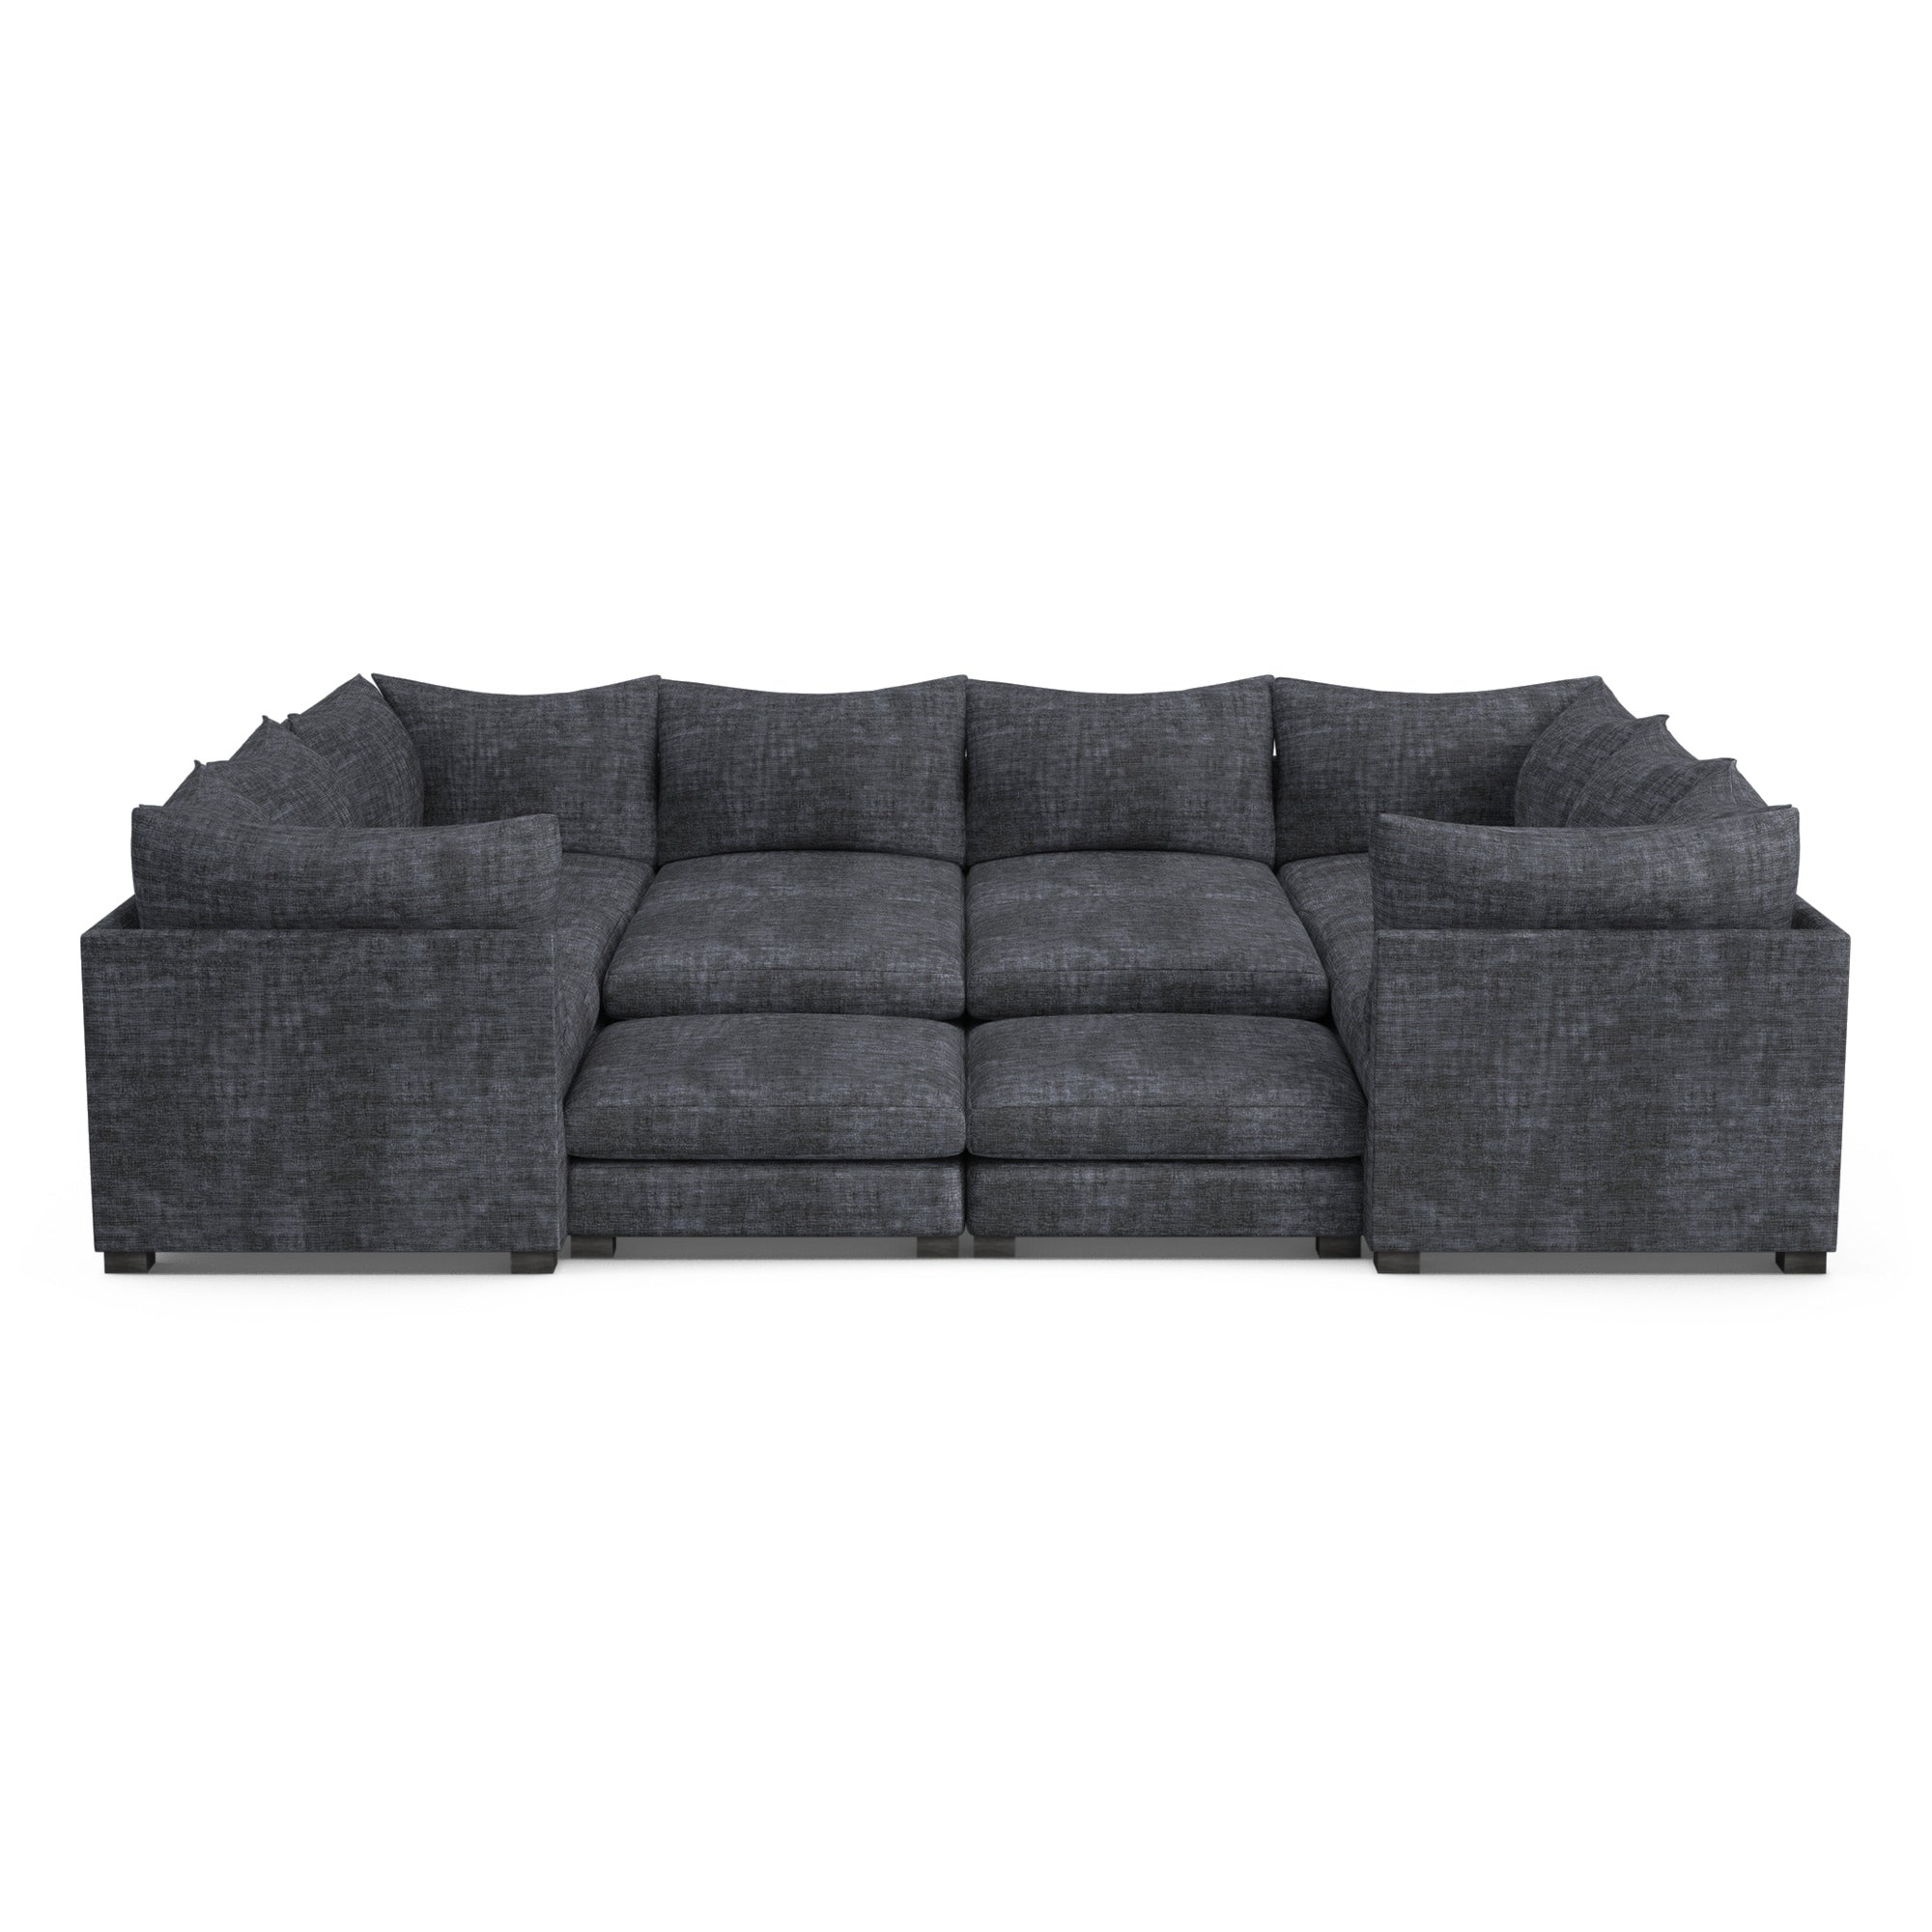 Evans 12-Piece Total-Pit Sectional - Graphite Crushed Velvet